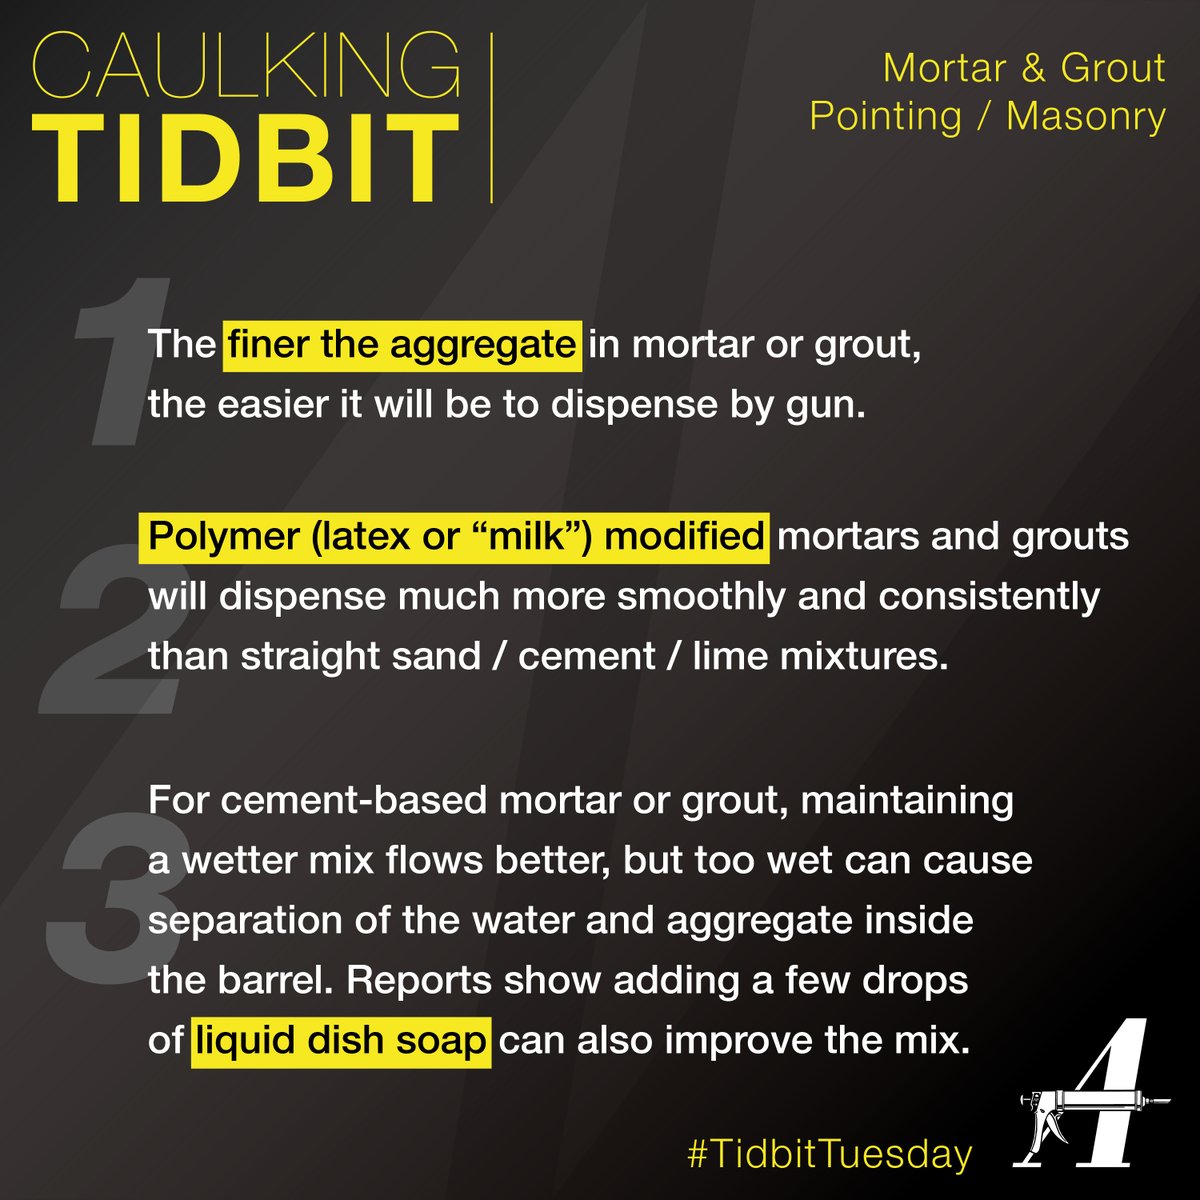 Did you know Albion makes tools for Mortar and Grout?
#TidbitTuesday #CaulkingTidbit #Mortar #Grout #Pointing #Masonry #brick #stone #tile #cement #sand #limestone #restoration #mason #masonryrestoration #build #dishsoap #caulking #building #construction #contractors #albioneng